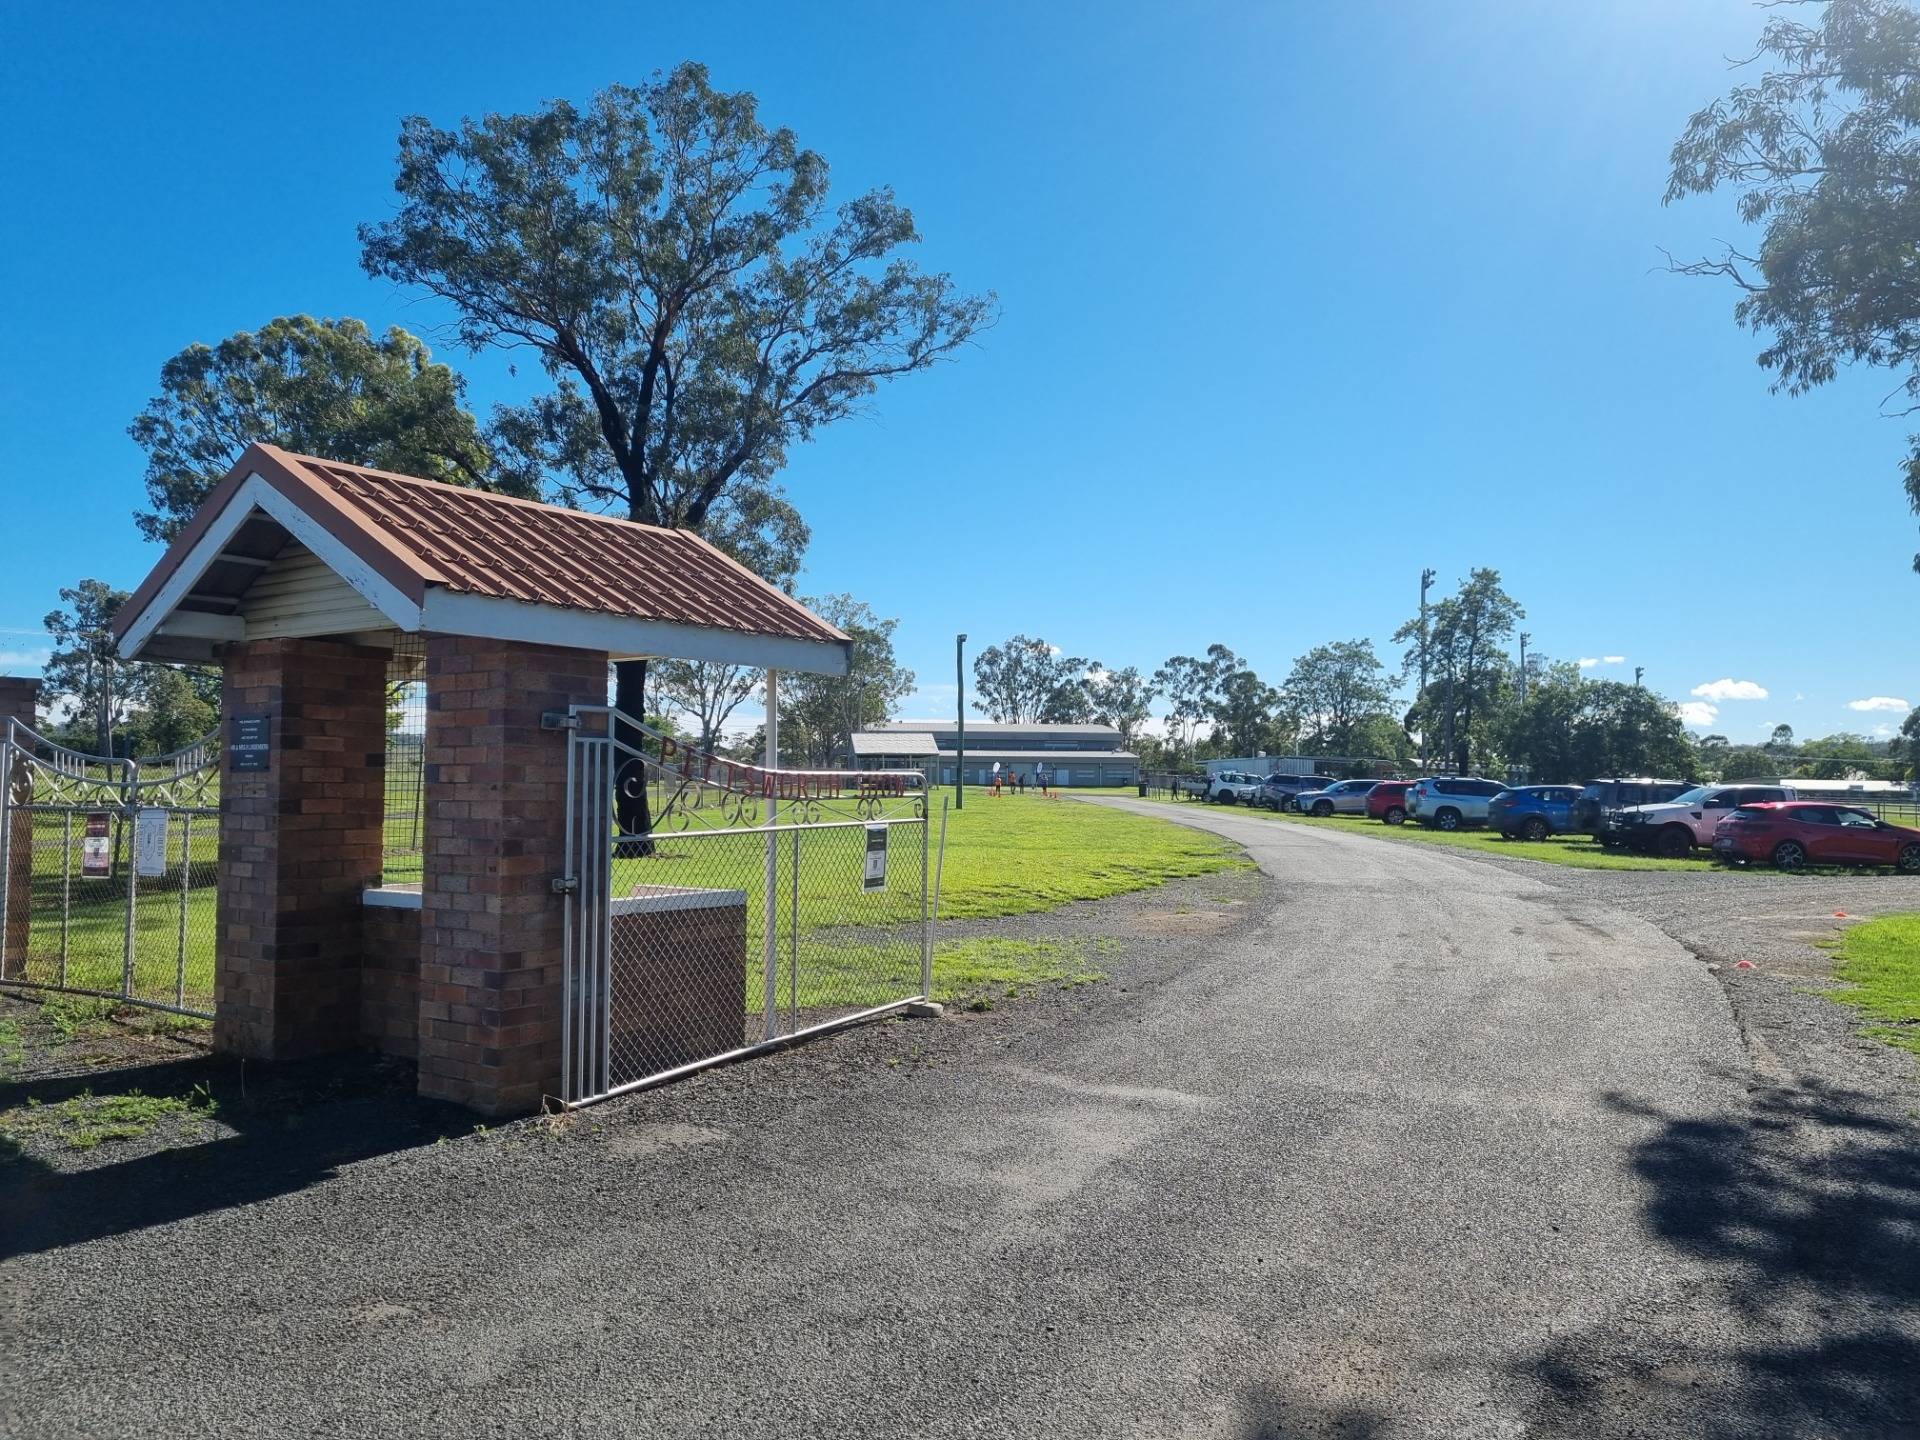 The entrance to the Pittsworth Showgrounds, where local events are held regularly and the local parkrun is held every Saturday (when there are not cows and horses running around, that is!)